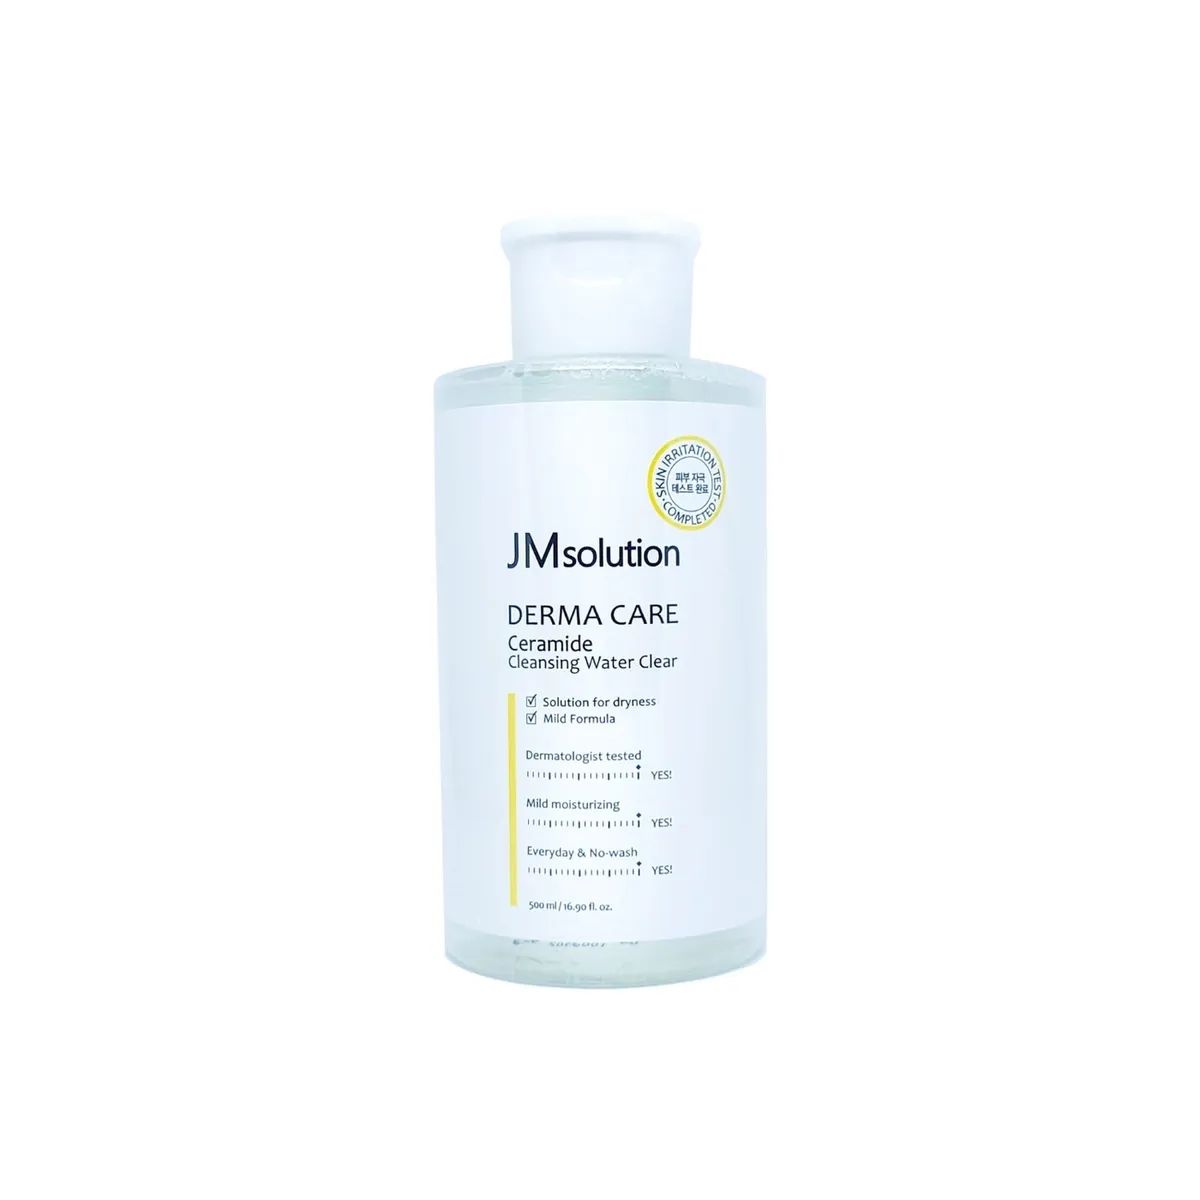 Мицеллярная вода JMSOLUTION DERMA CARE CERAMIDE CLEANSING WATER CLEAR 500мл premium вода мицеллярная homework cristal clear 110 мл